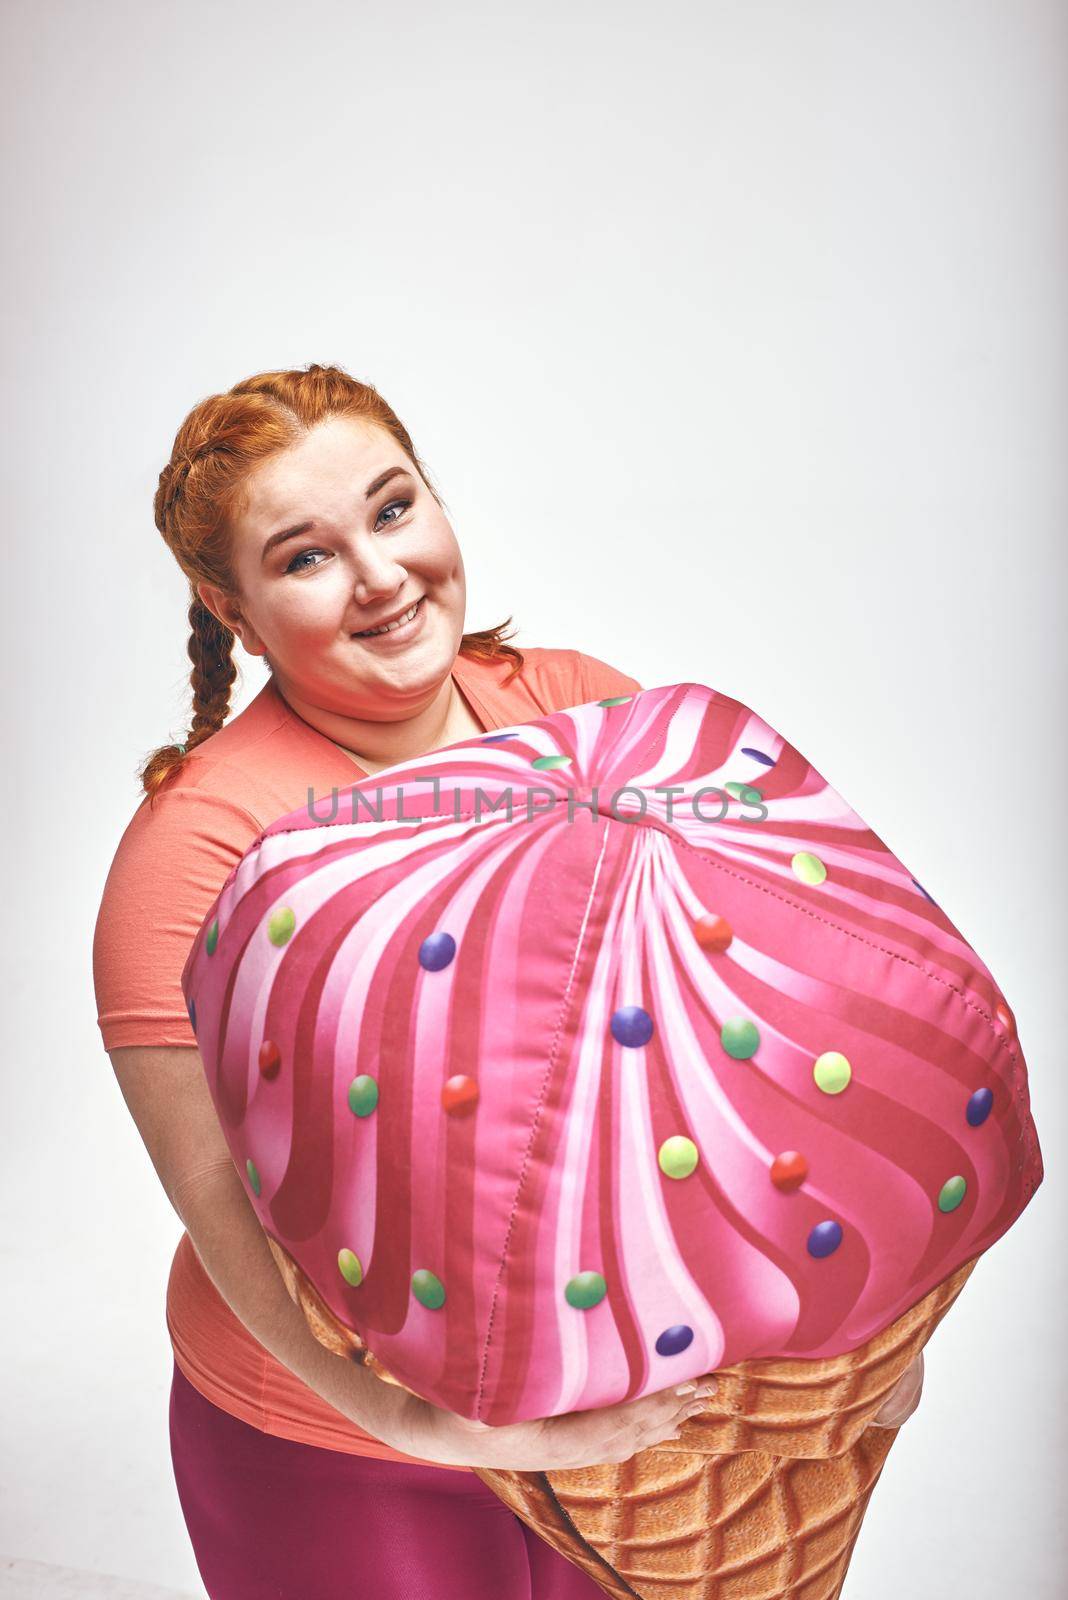 Close-up funny picture of amusing, red haired, chubby woman on white background. Woman is holding a huge ice cream